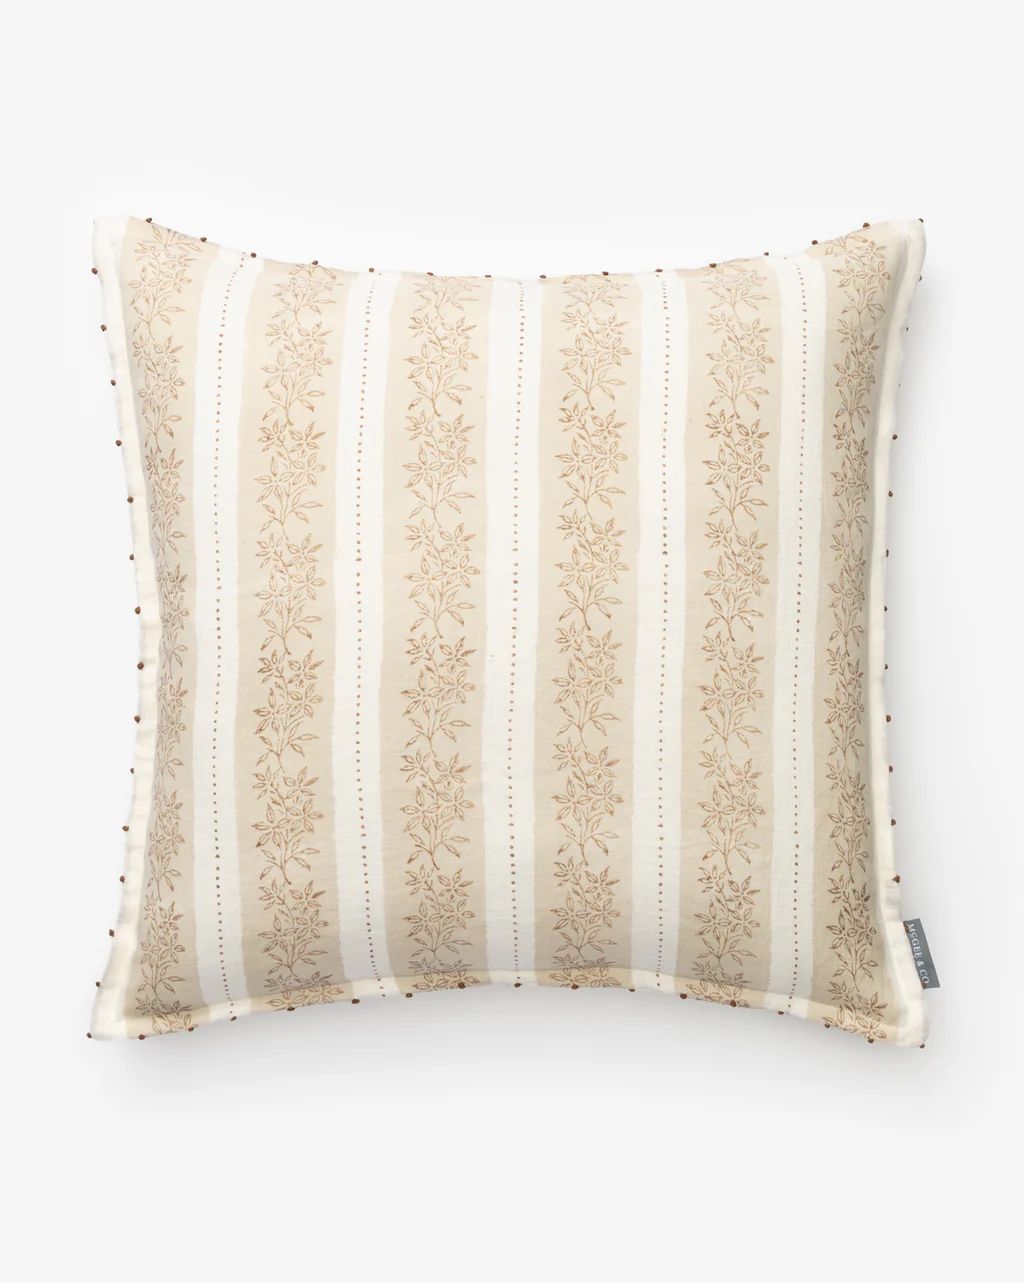 Nettles Pillow Cover | McGee & Co. (US)